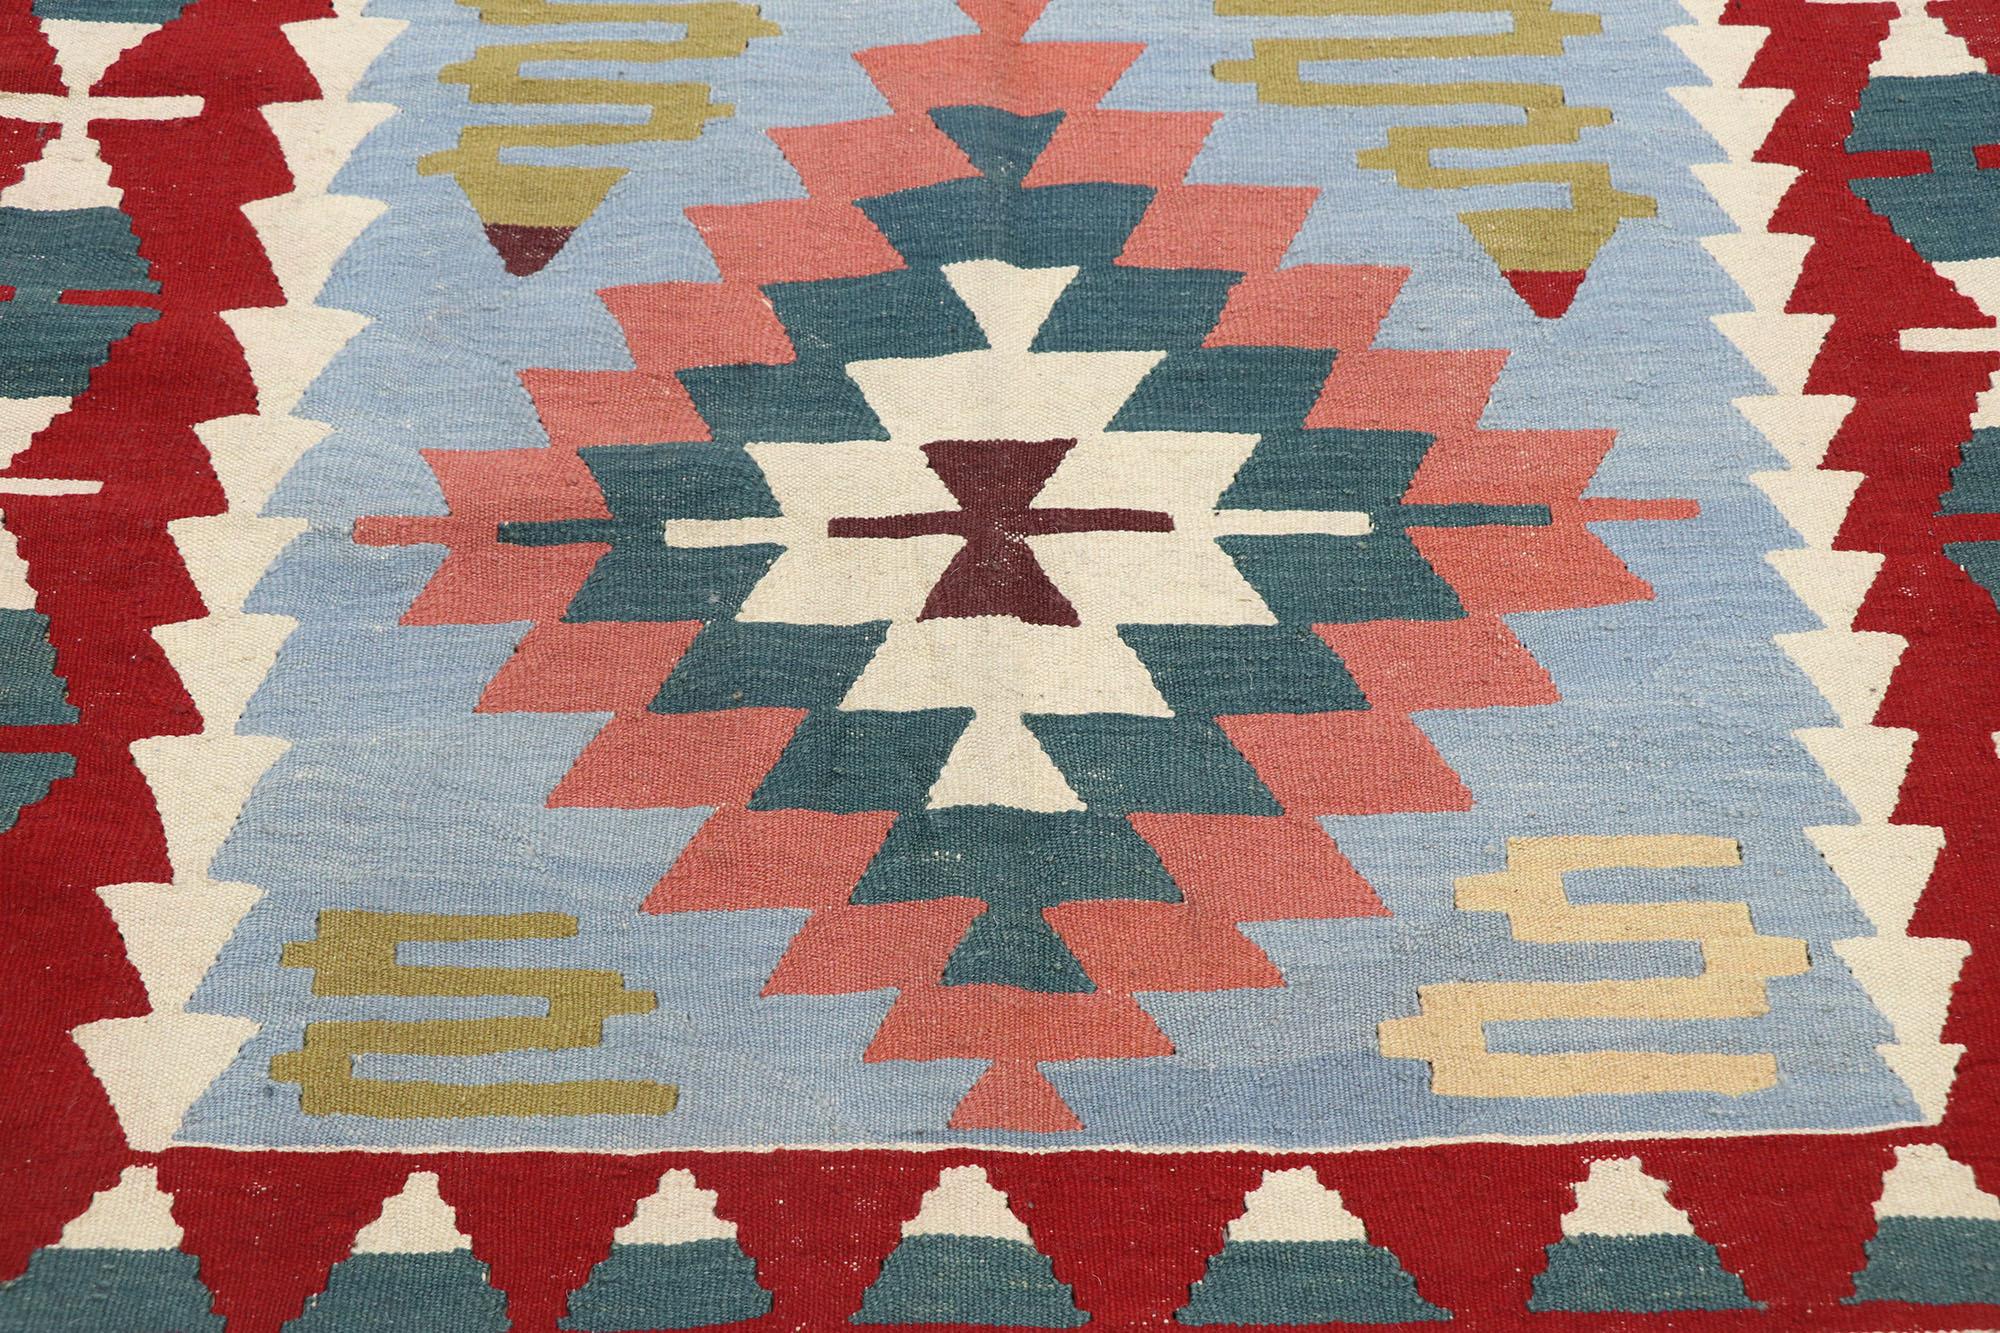 Vintage Persian Shiraz Kilim Rug, Luxury Lodge Meets Southwest Desert Style In Good Condition For Sale In Dallas, TX